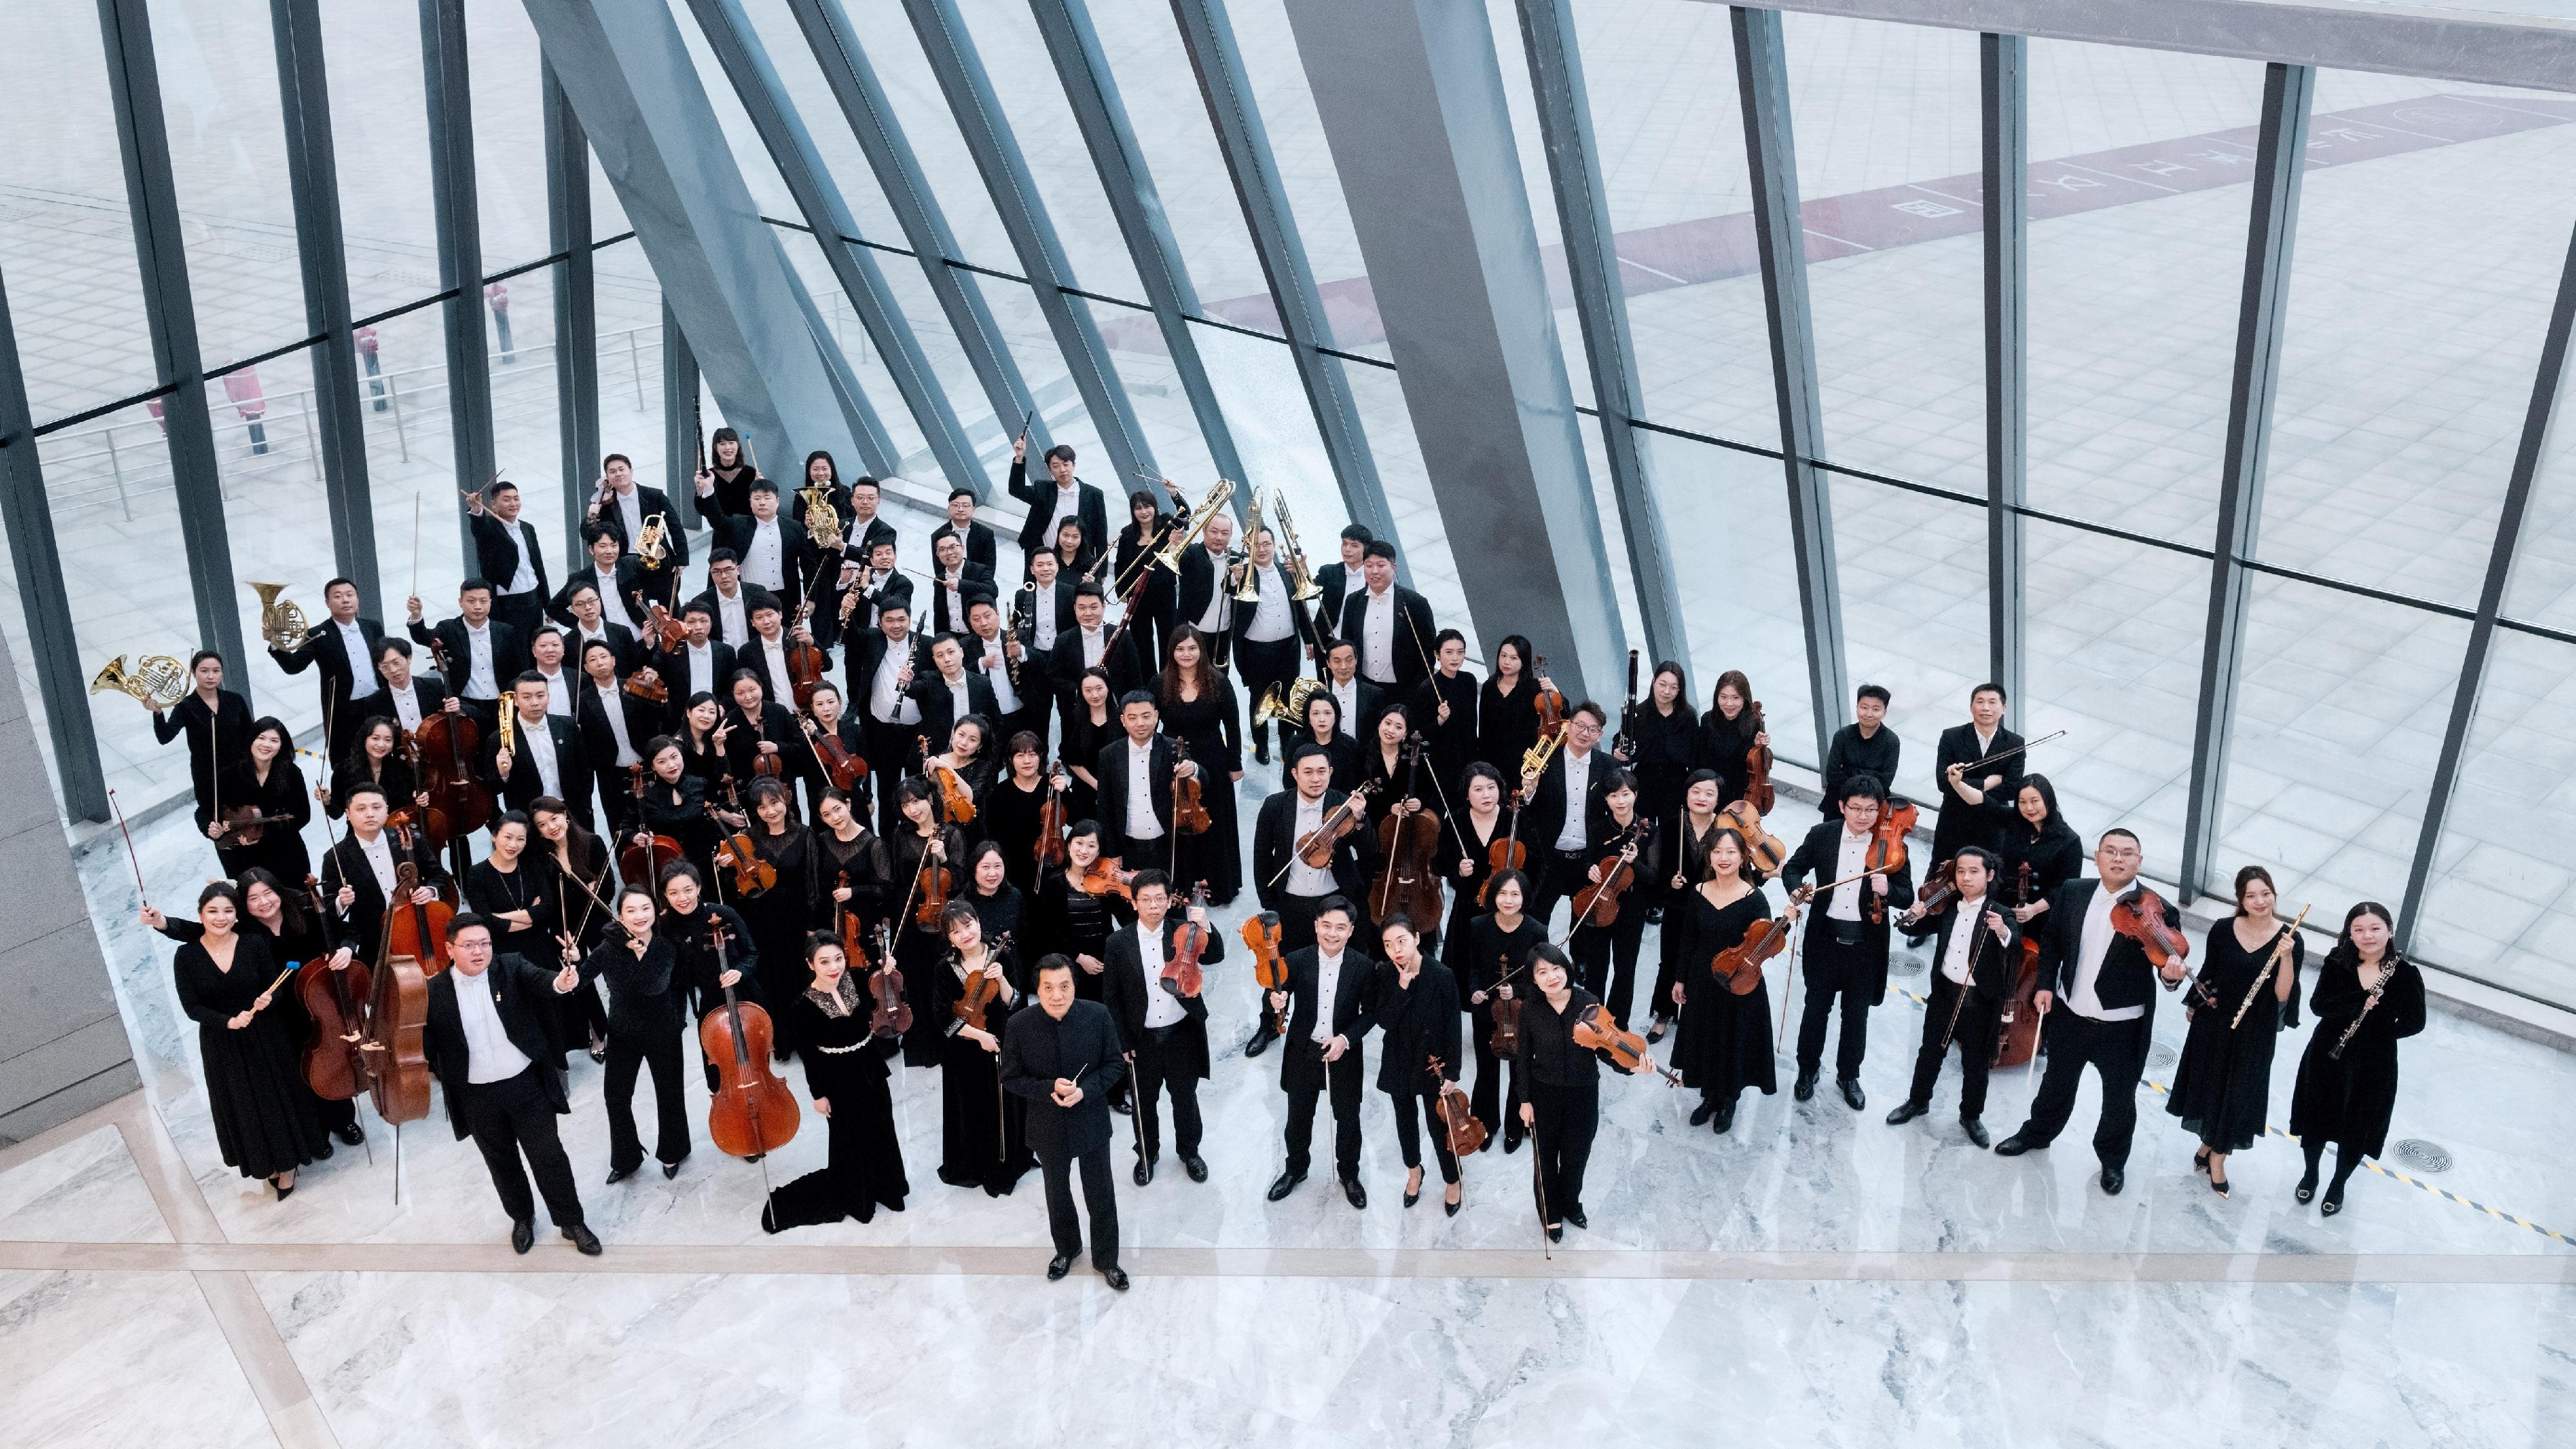 The Leisure and Cultural Services Department will present the "Tan Dun WE-Festival" in December. Photo shows Hunan-Changsha Symphony Orchestra.